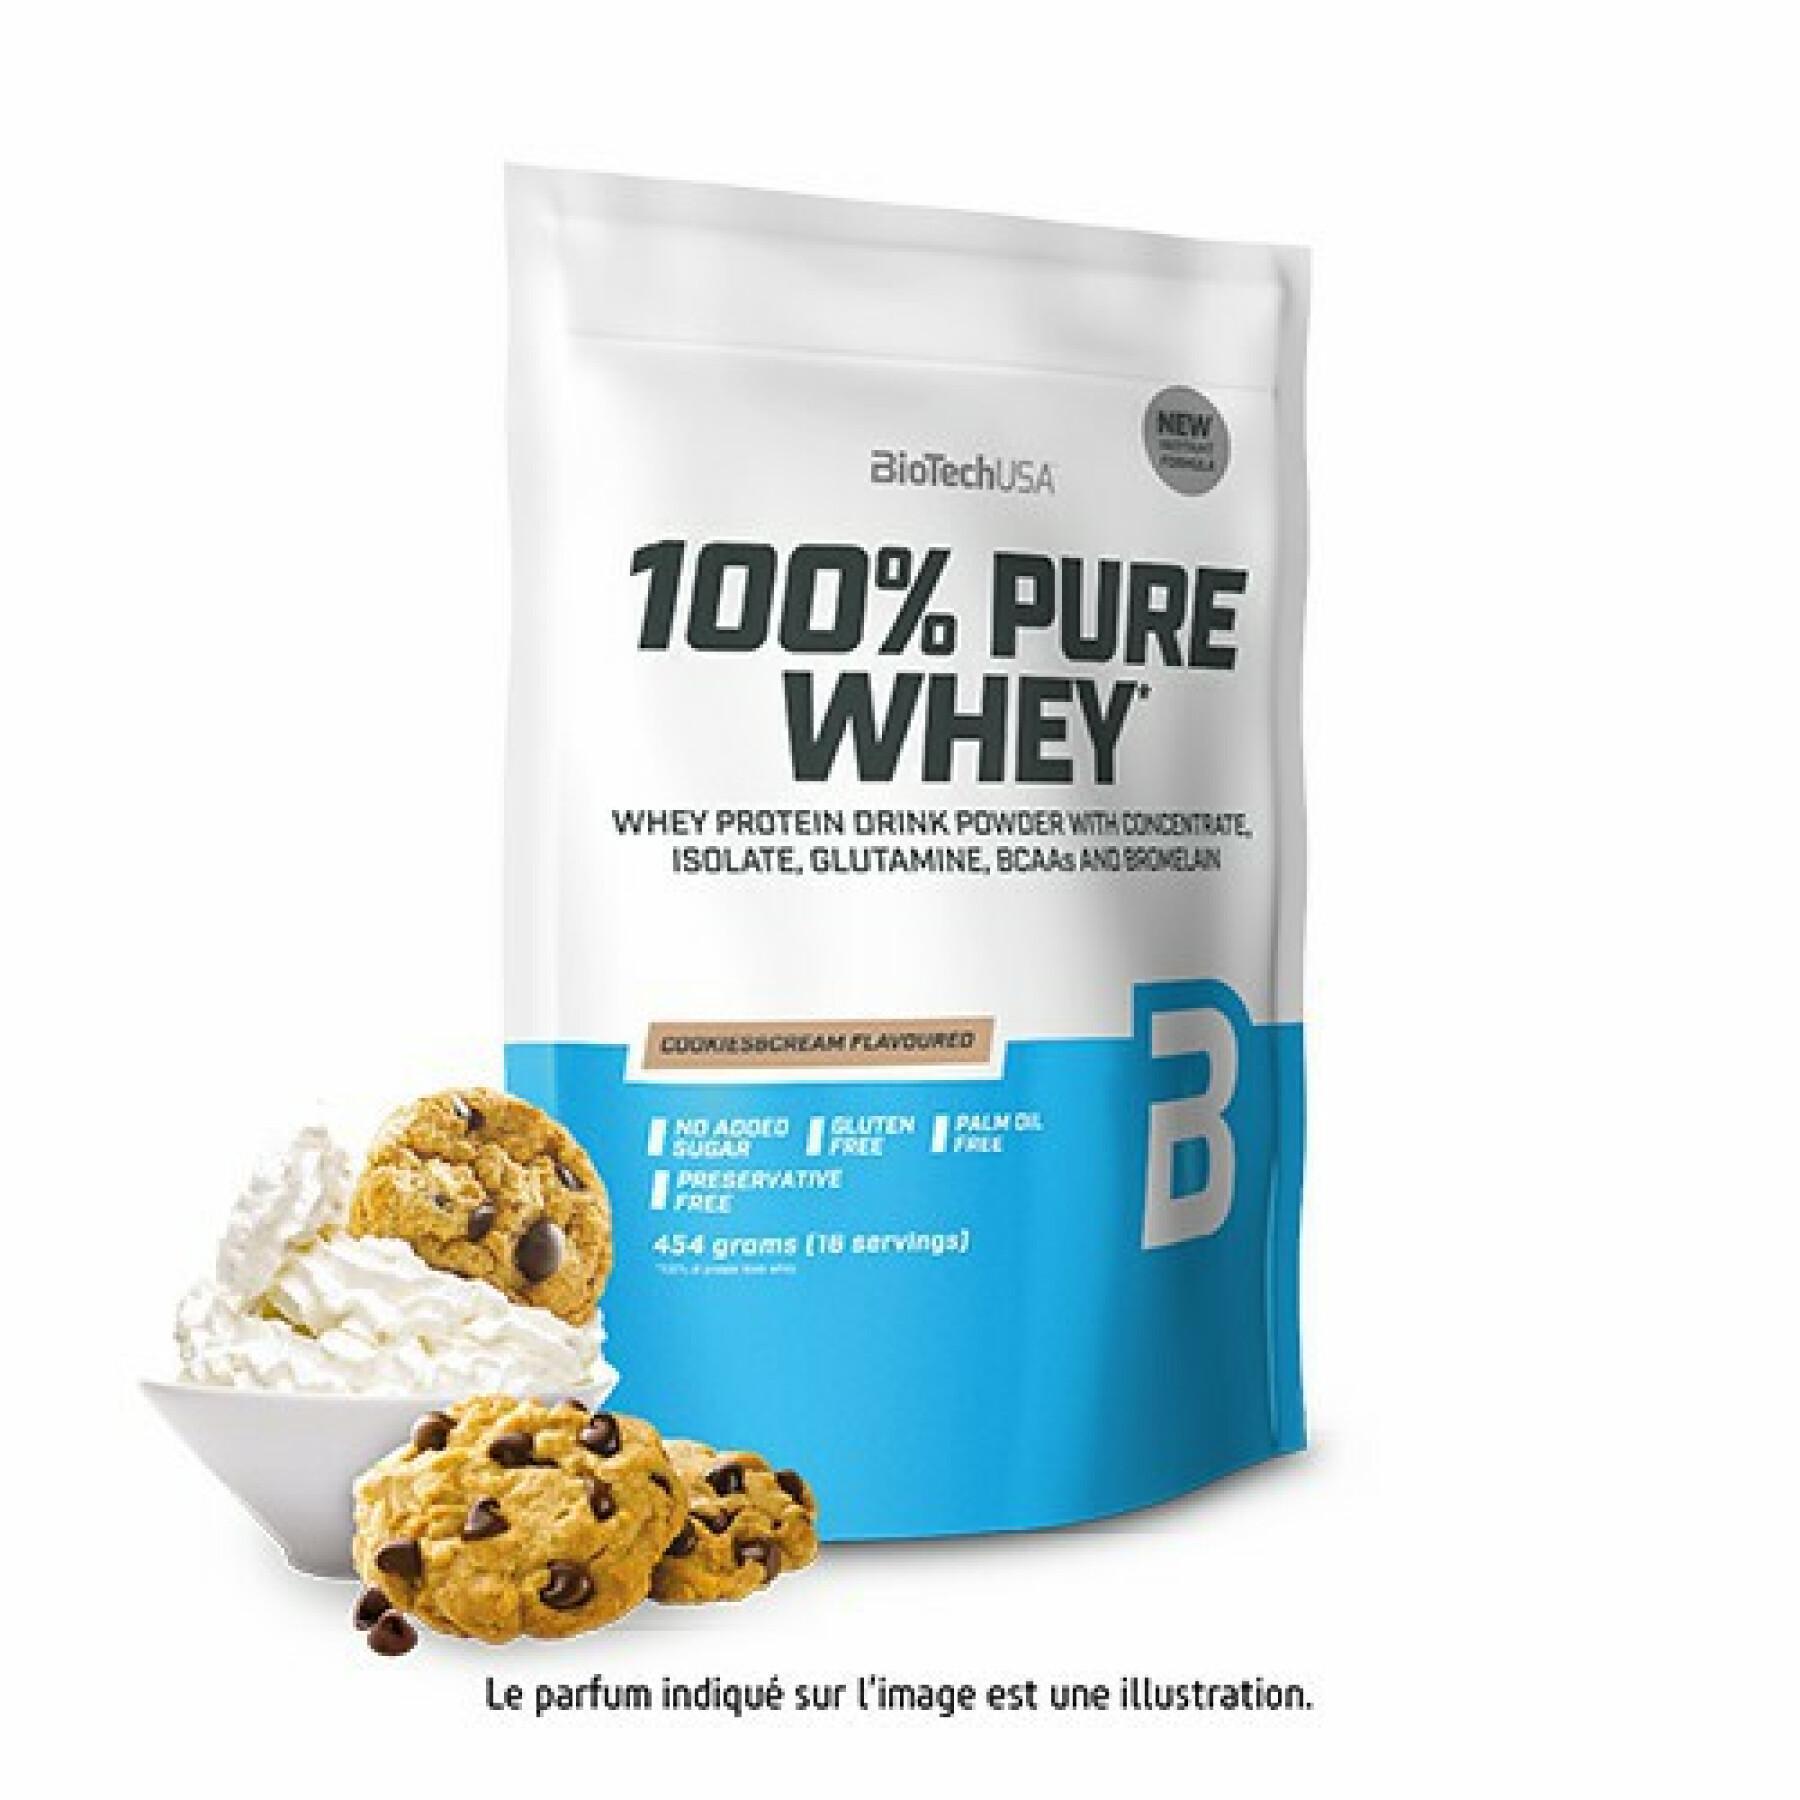 Lot of 10 bags of 100% pure whey Biotech USA - Black Biscuit - 454g